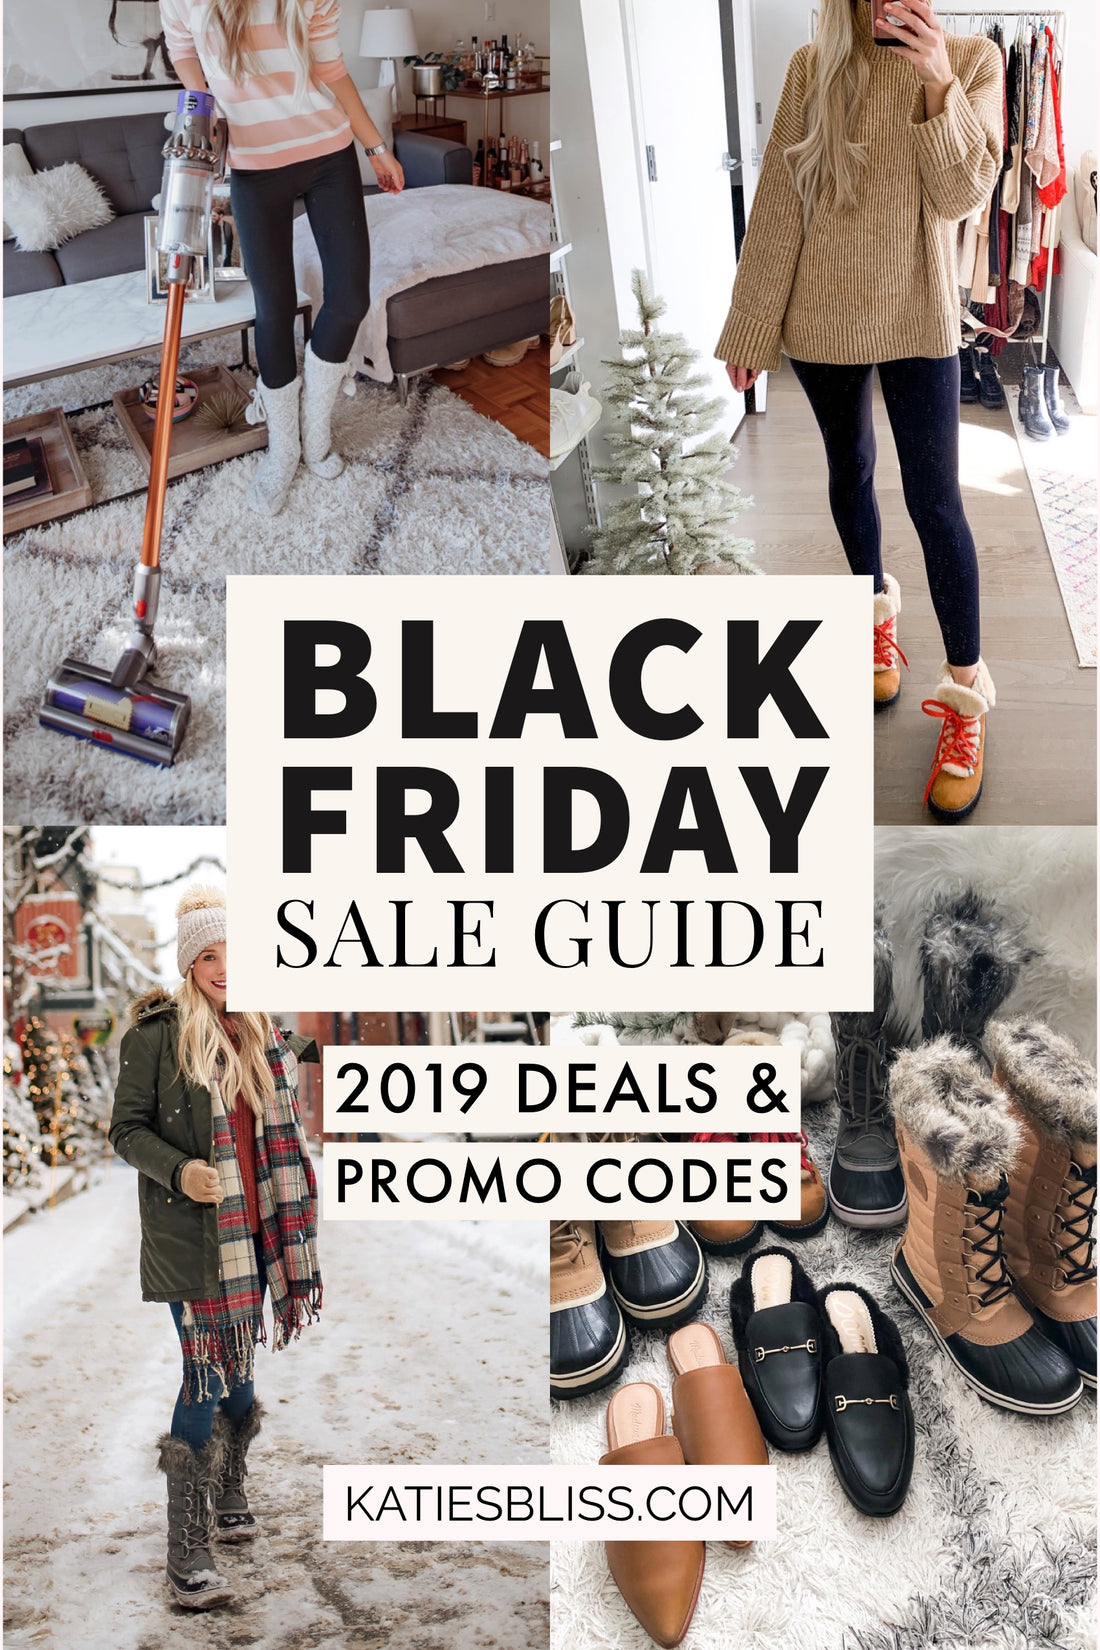 2019 Black Friday Sales Guide | Promo Codes & Exclusive Offers